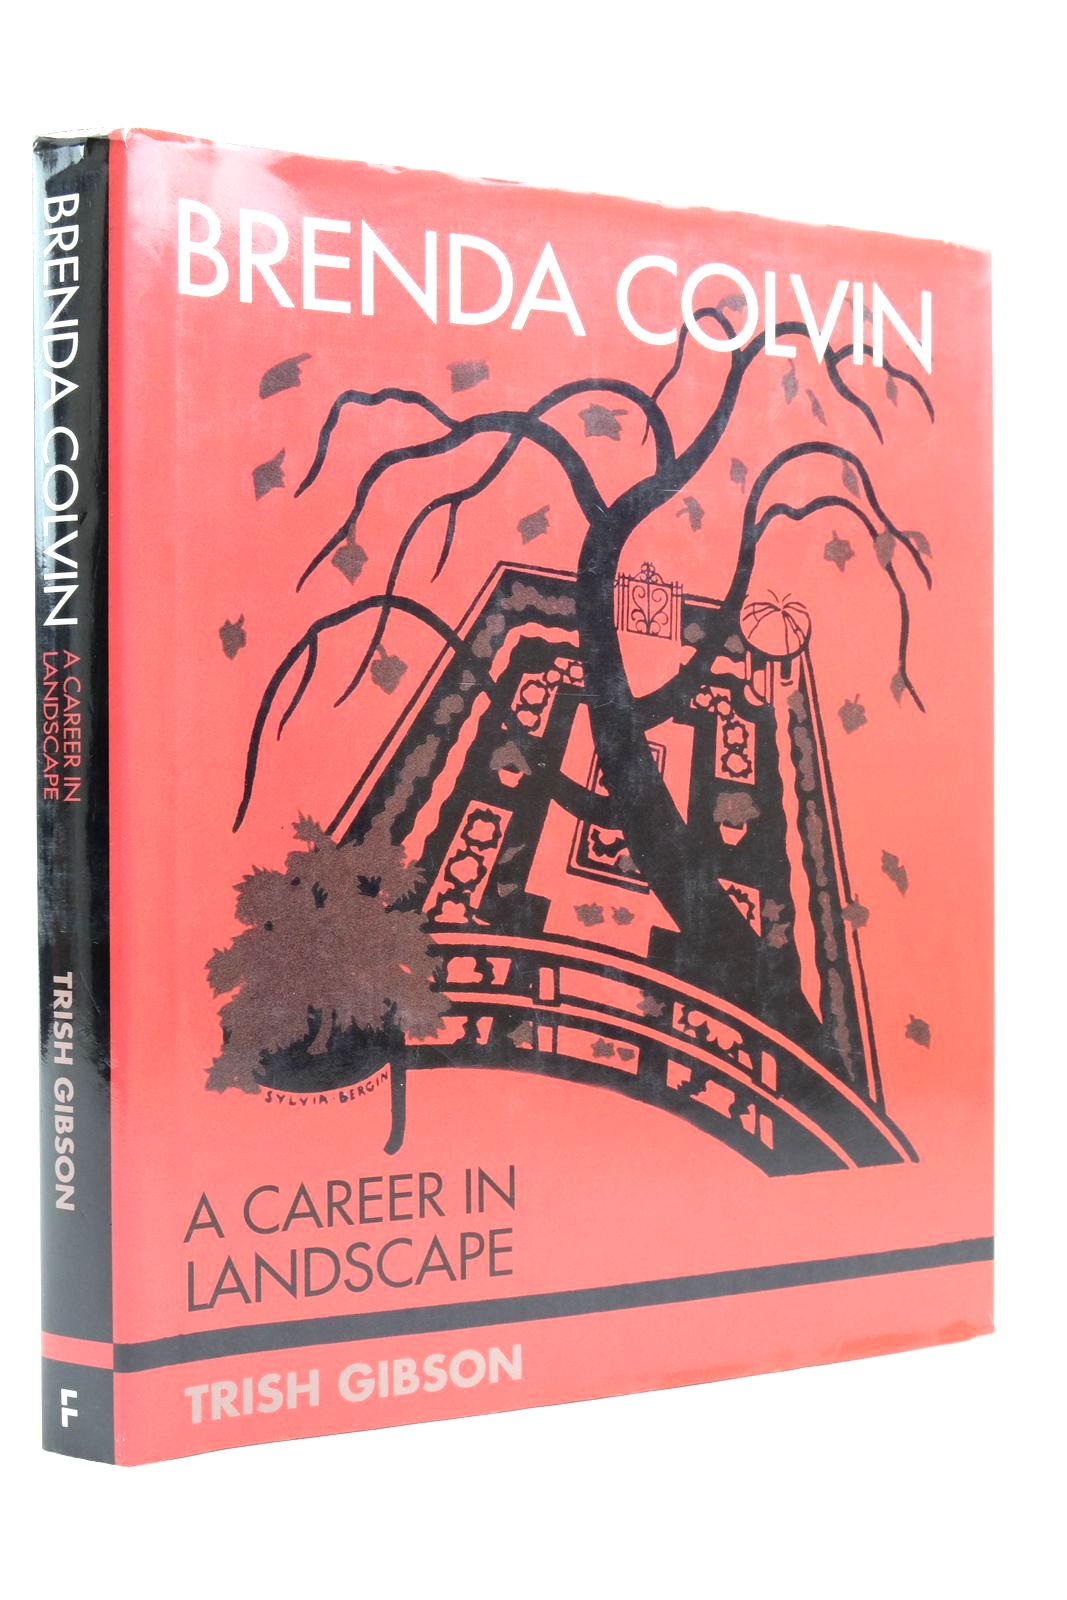 Photo of BRENDA COLVIN: A CAREER IN LANDSCAPE written by Gibson, Trish published by Frances Lincoln Limited (STOCK CODE: 2138909)  for sale by Stella & Rose's Books